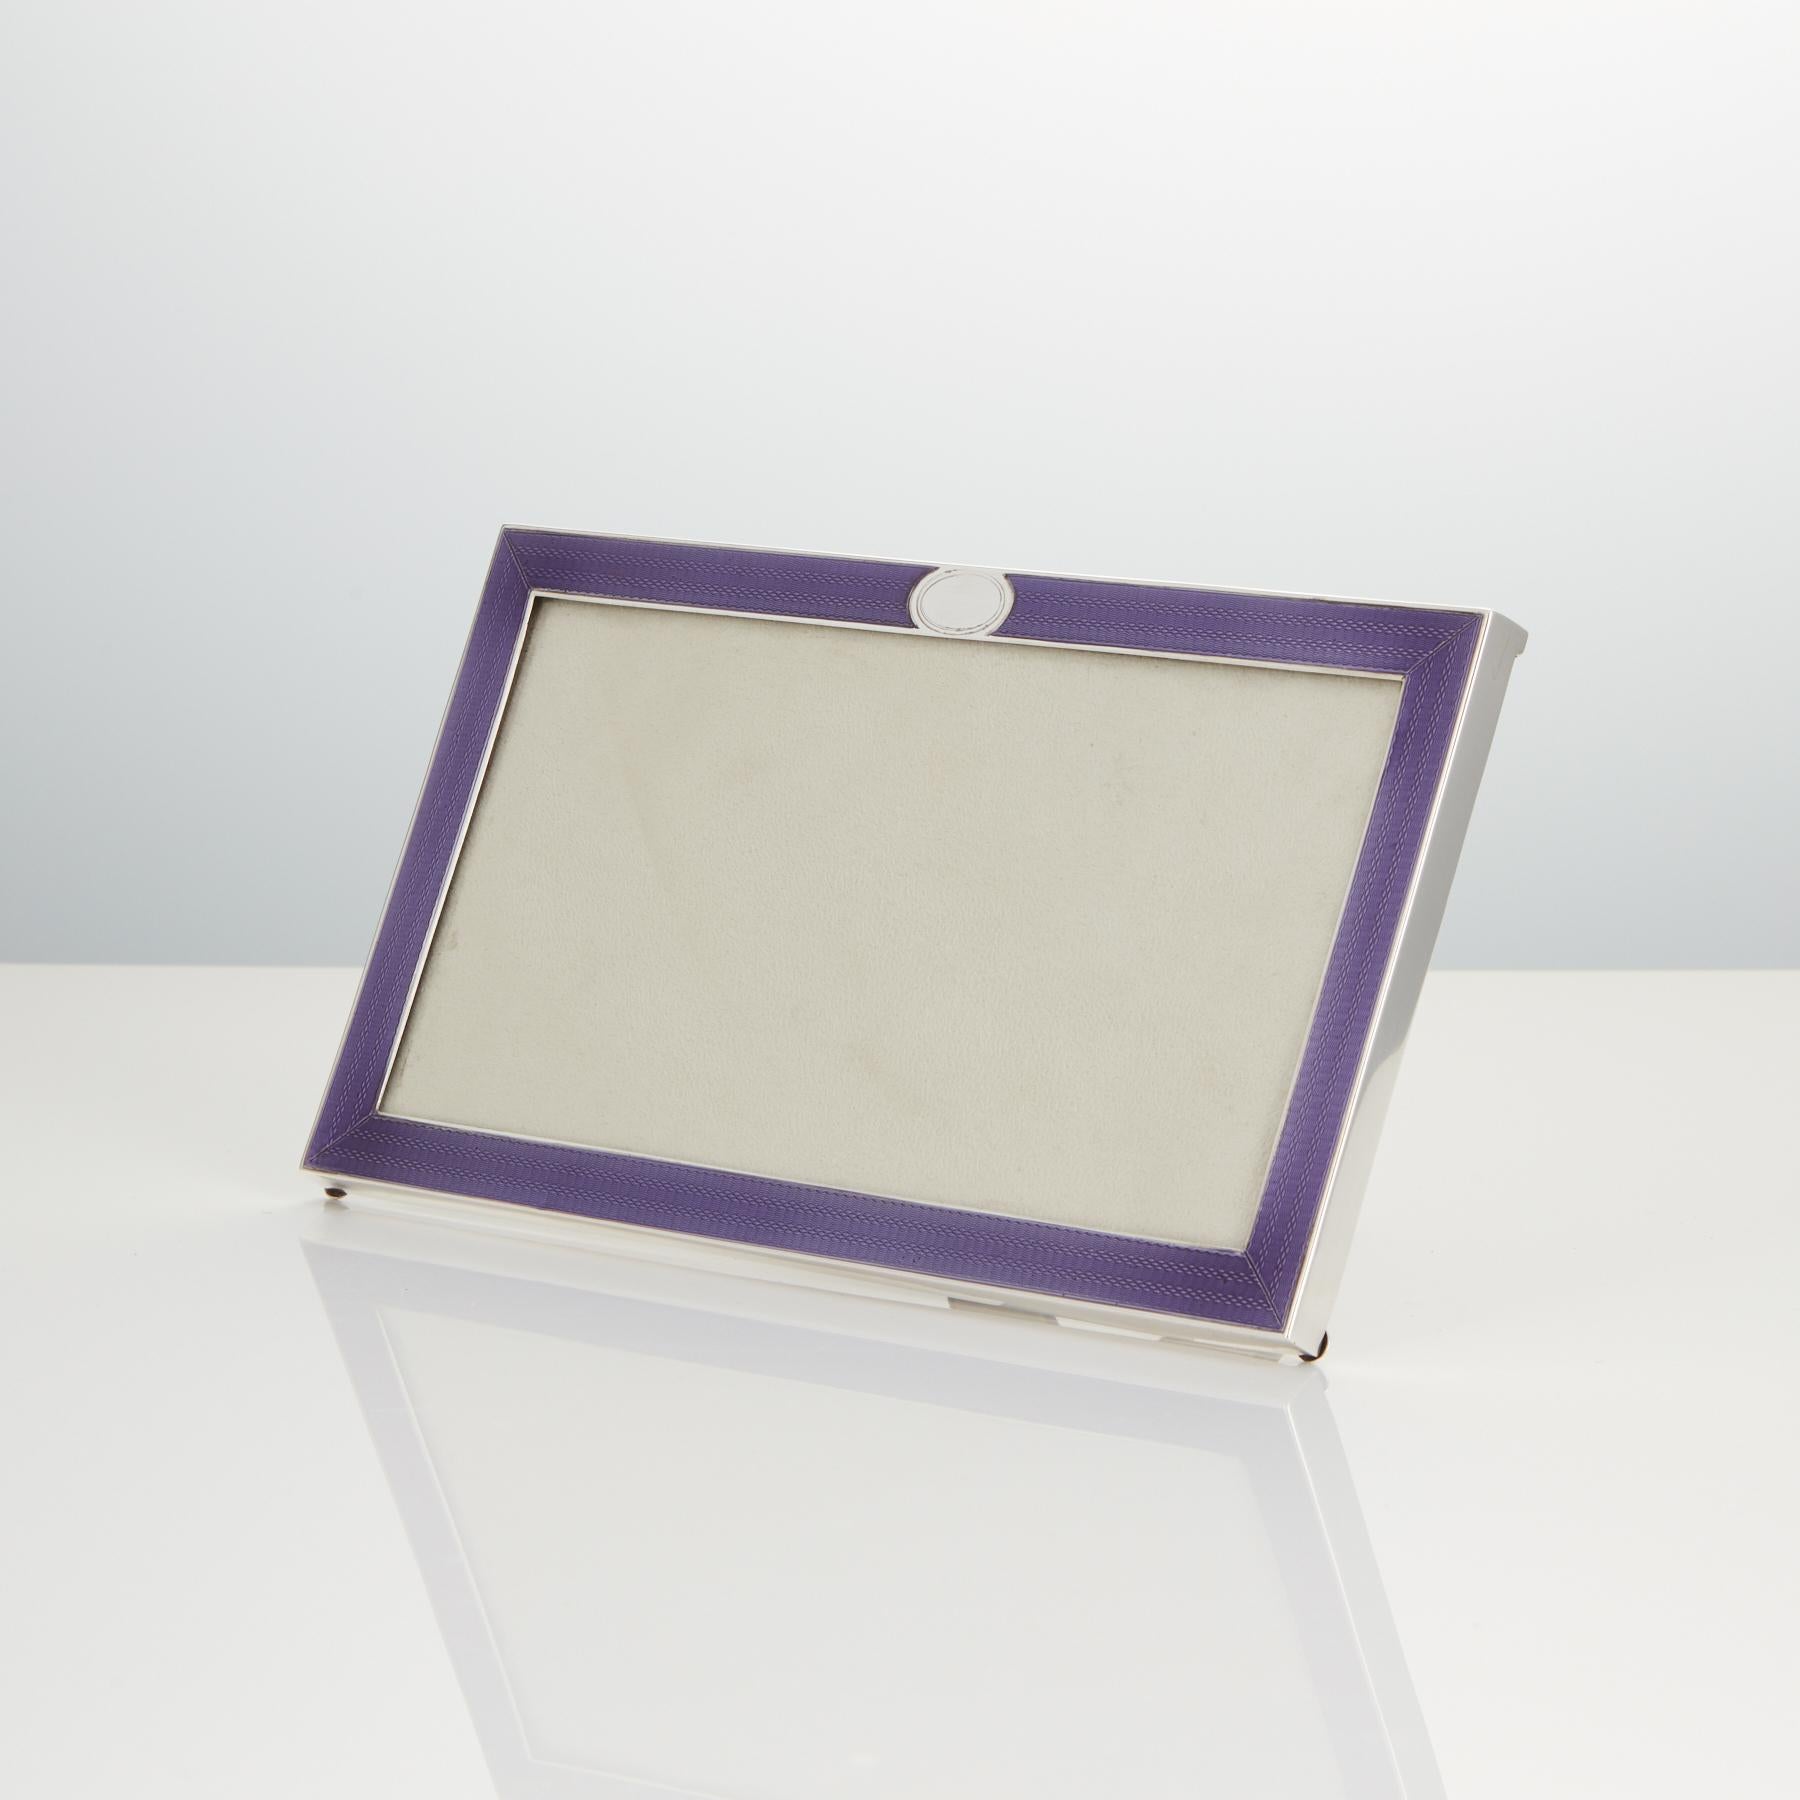 This stunning mauve enamel photograph frame retains the original condition and high iridescent quality of the enamel. 

The back and easel strut are also in original condition.

Maker Goldsmith & Silversmith Co Ltd. The firm was established in 1880